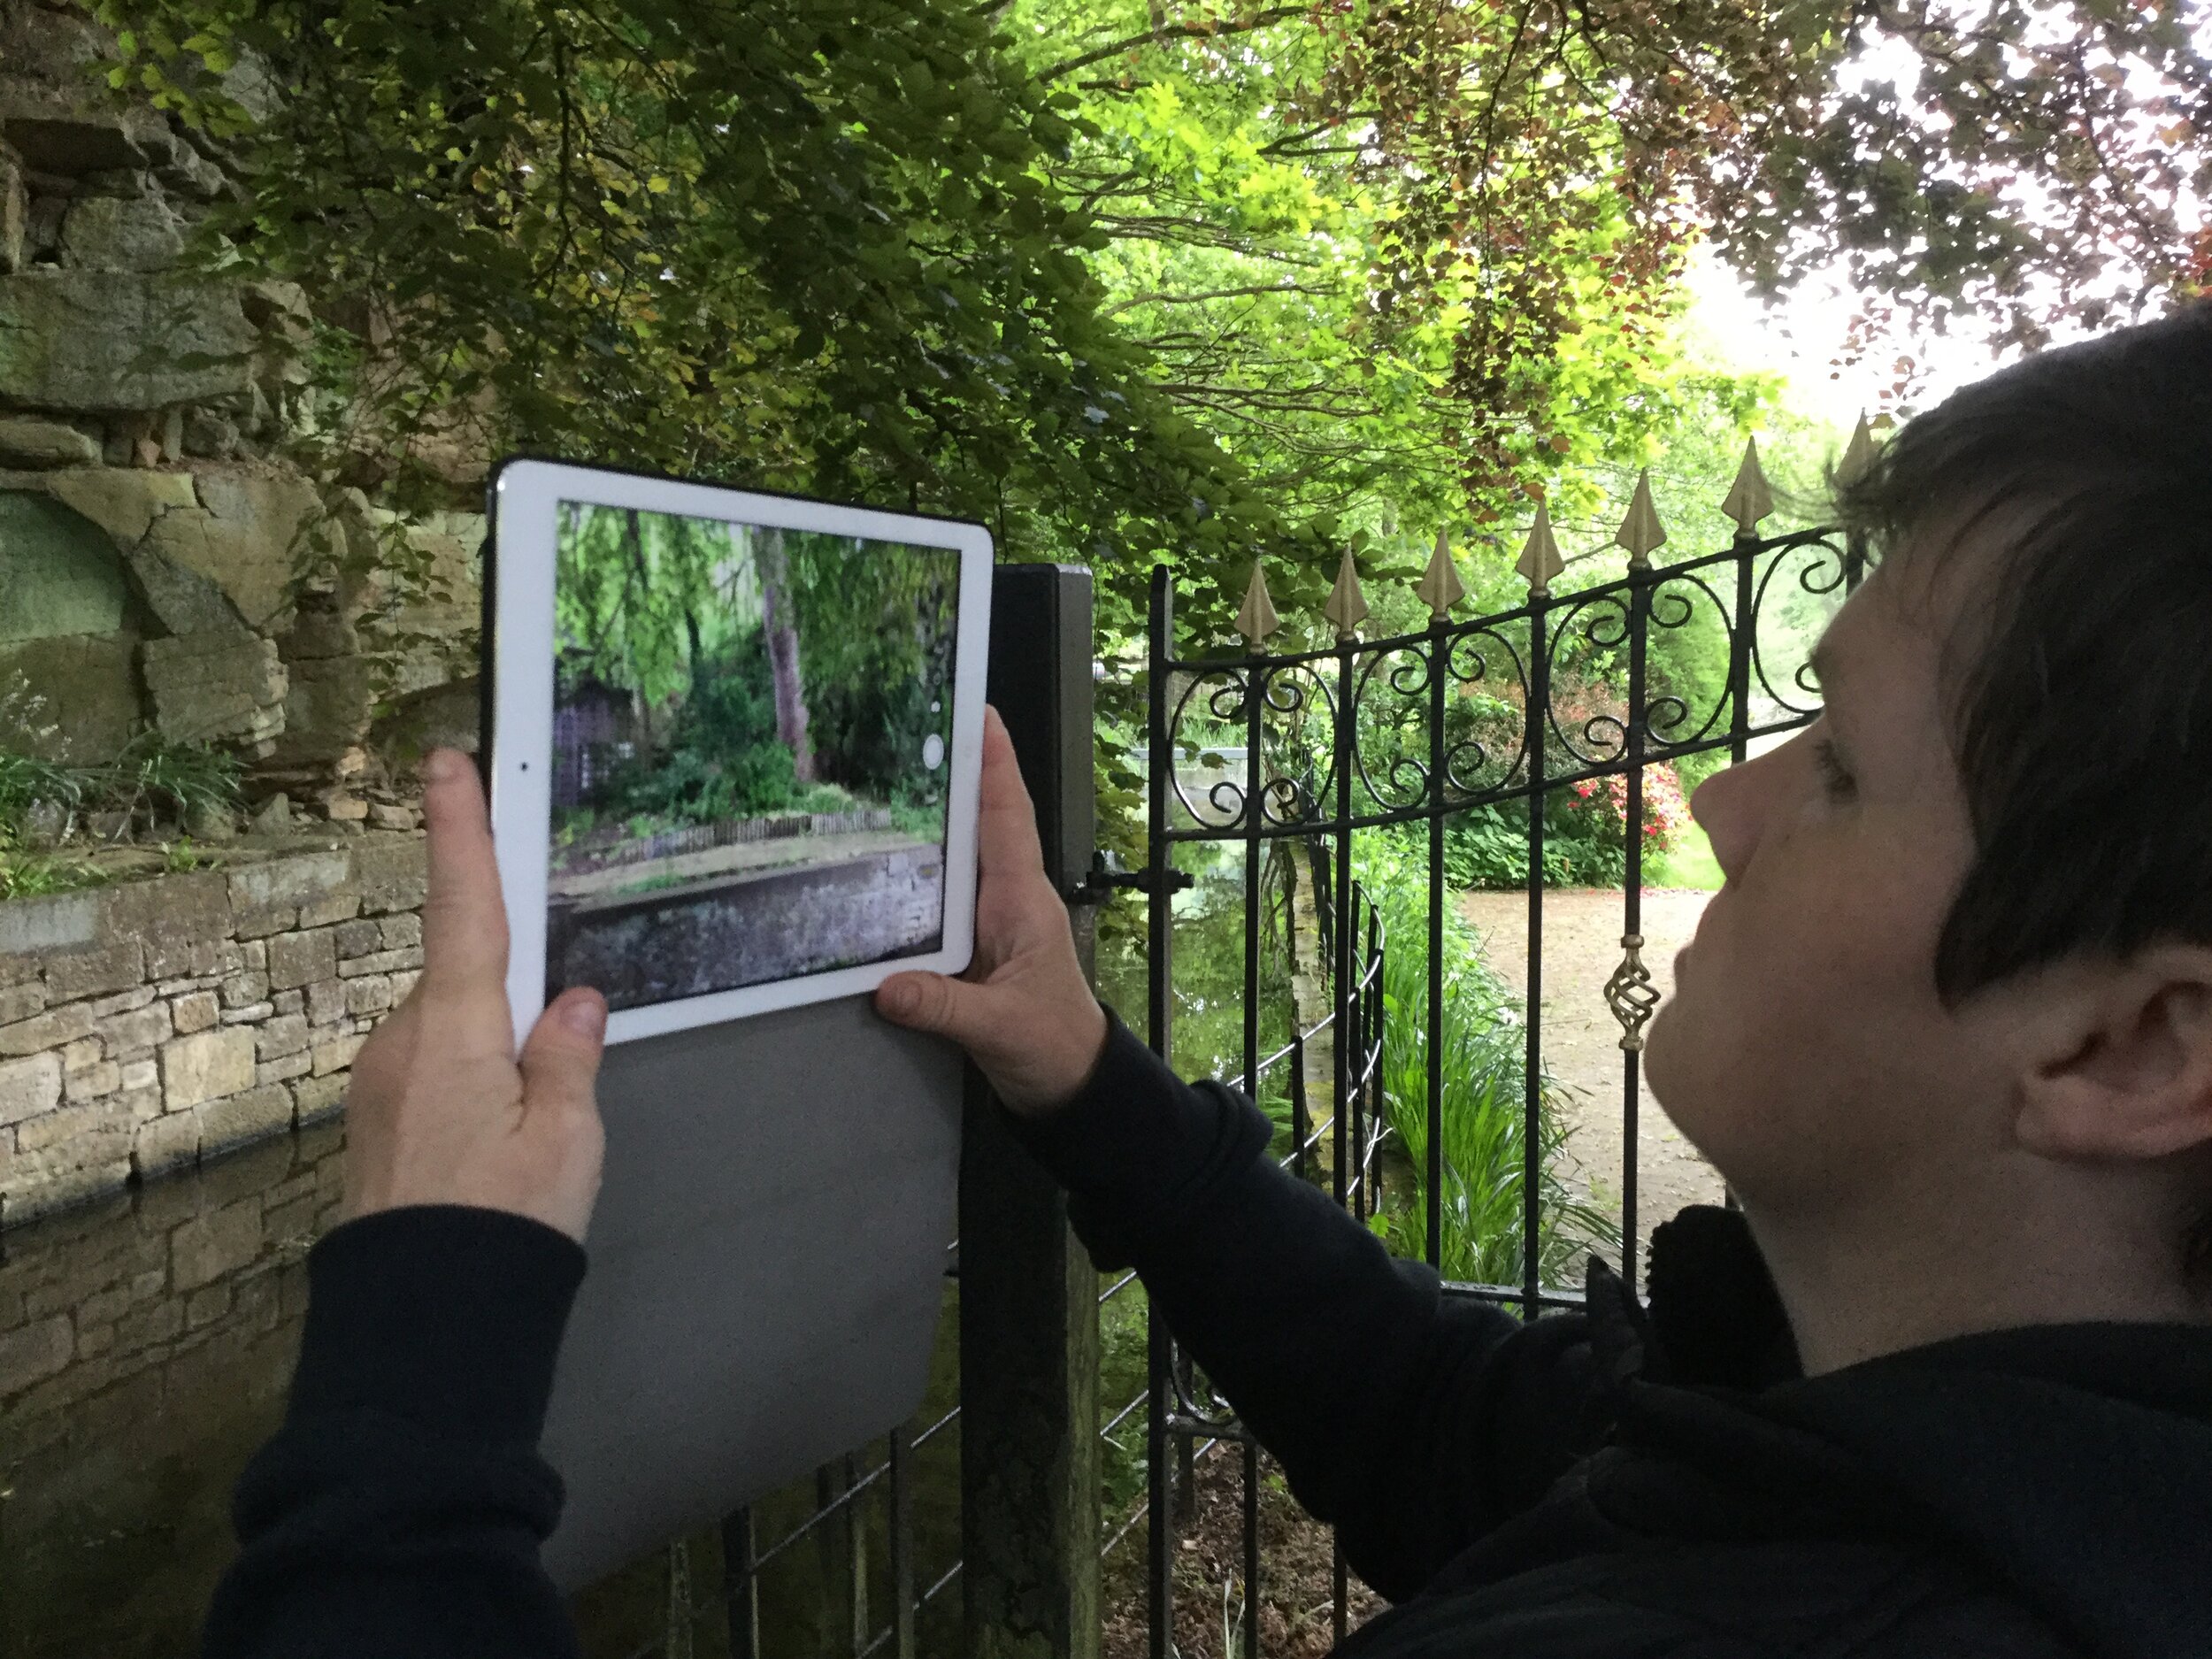 Participant using the ipad to take an image of trees